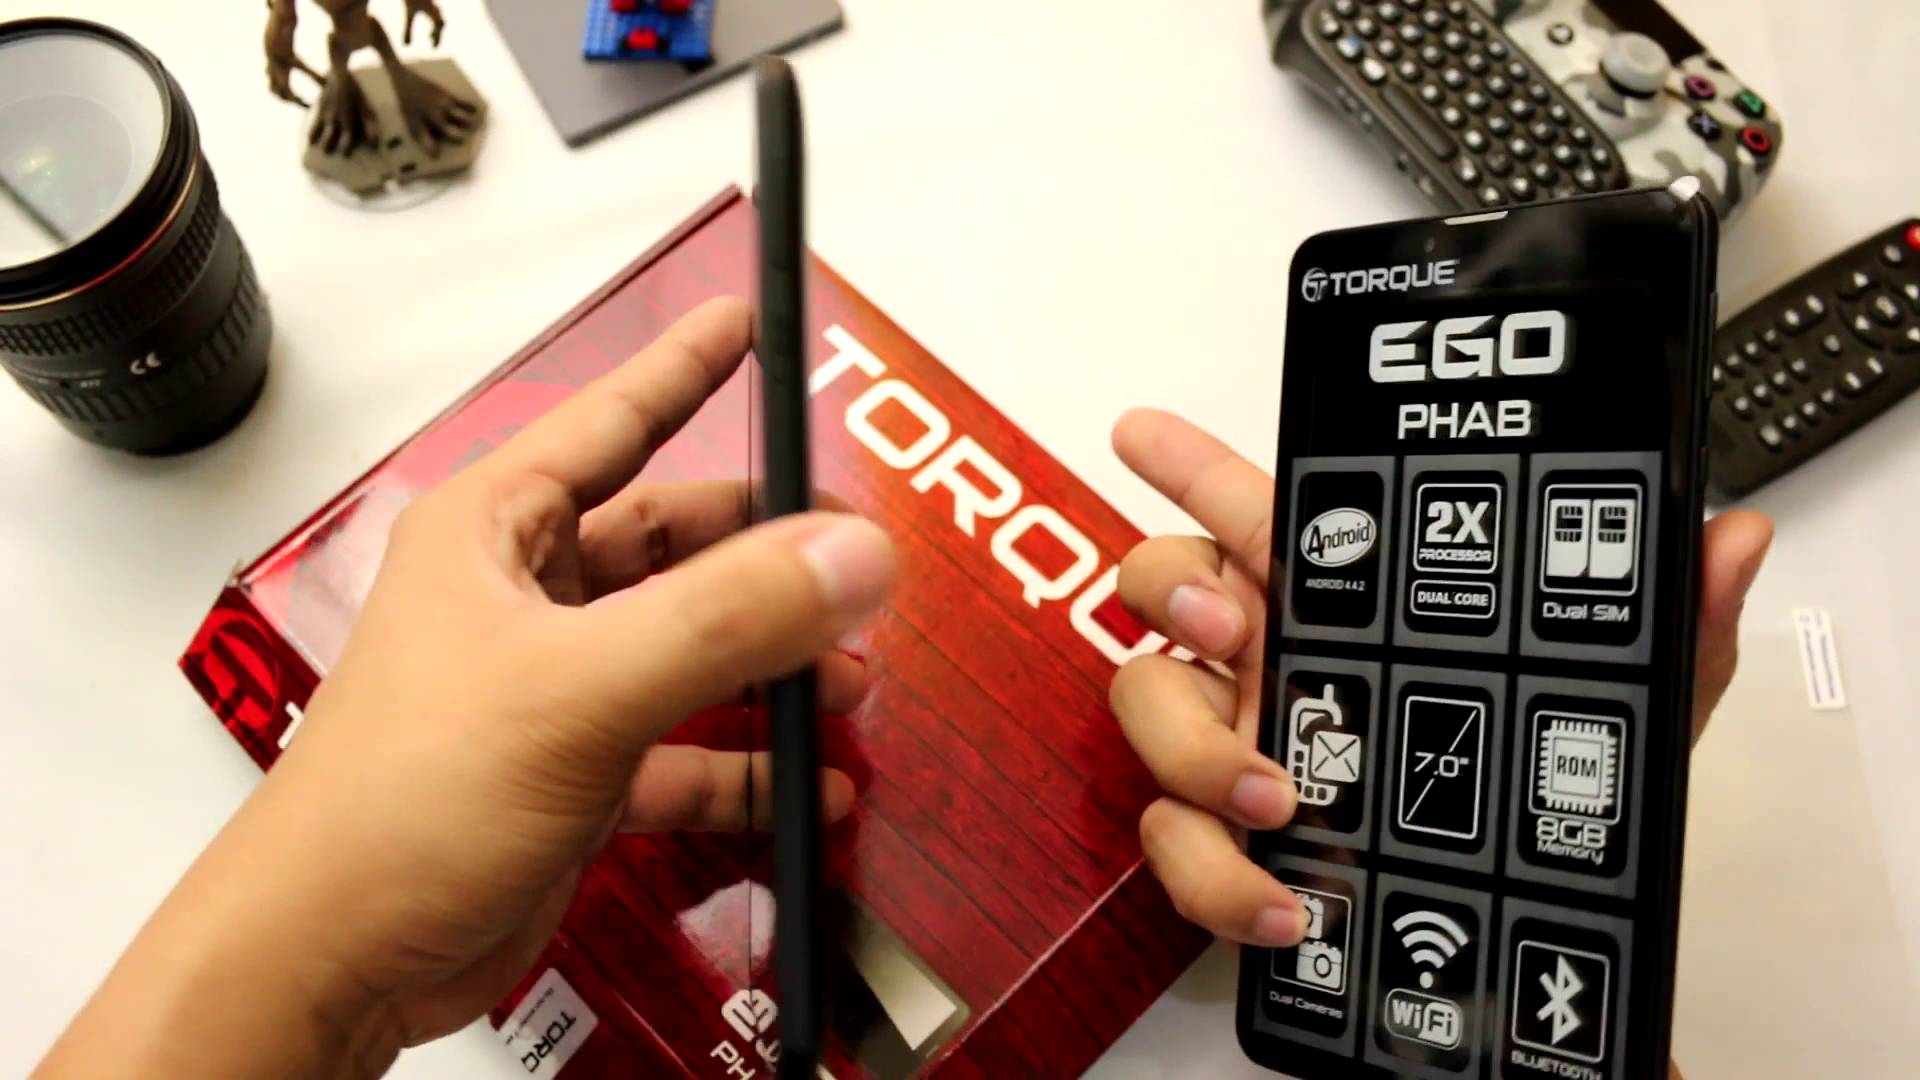 VIDEO: Torque Ego Phab 3G Unboxing and Device Preview